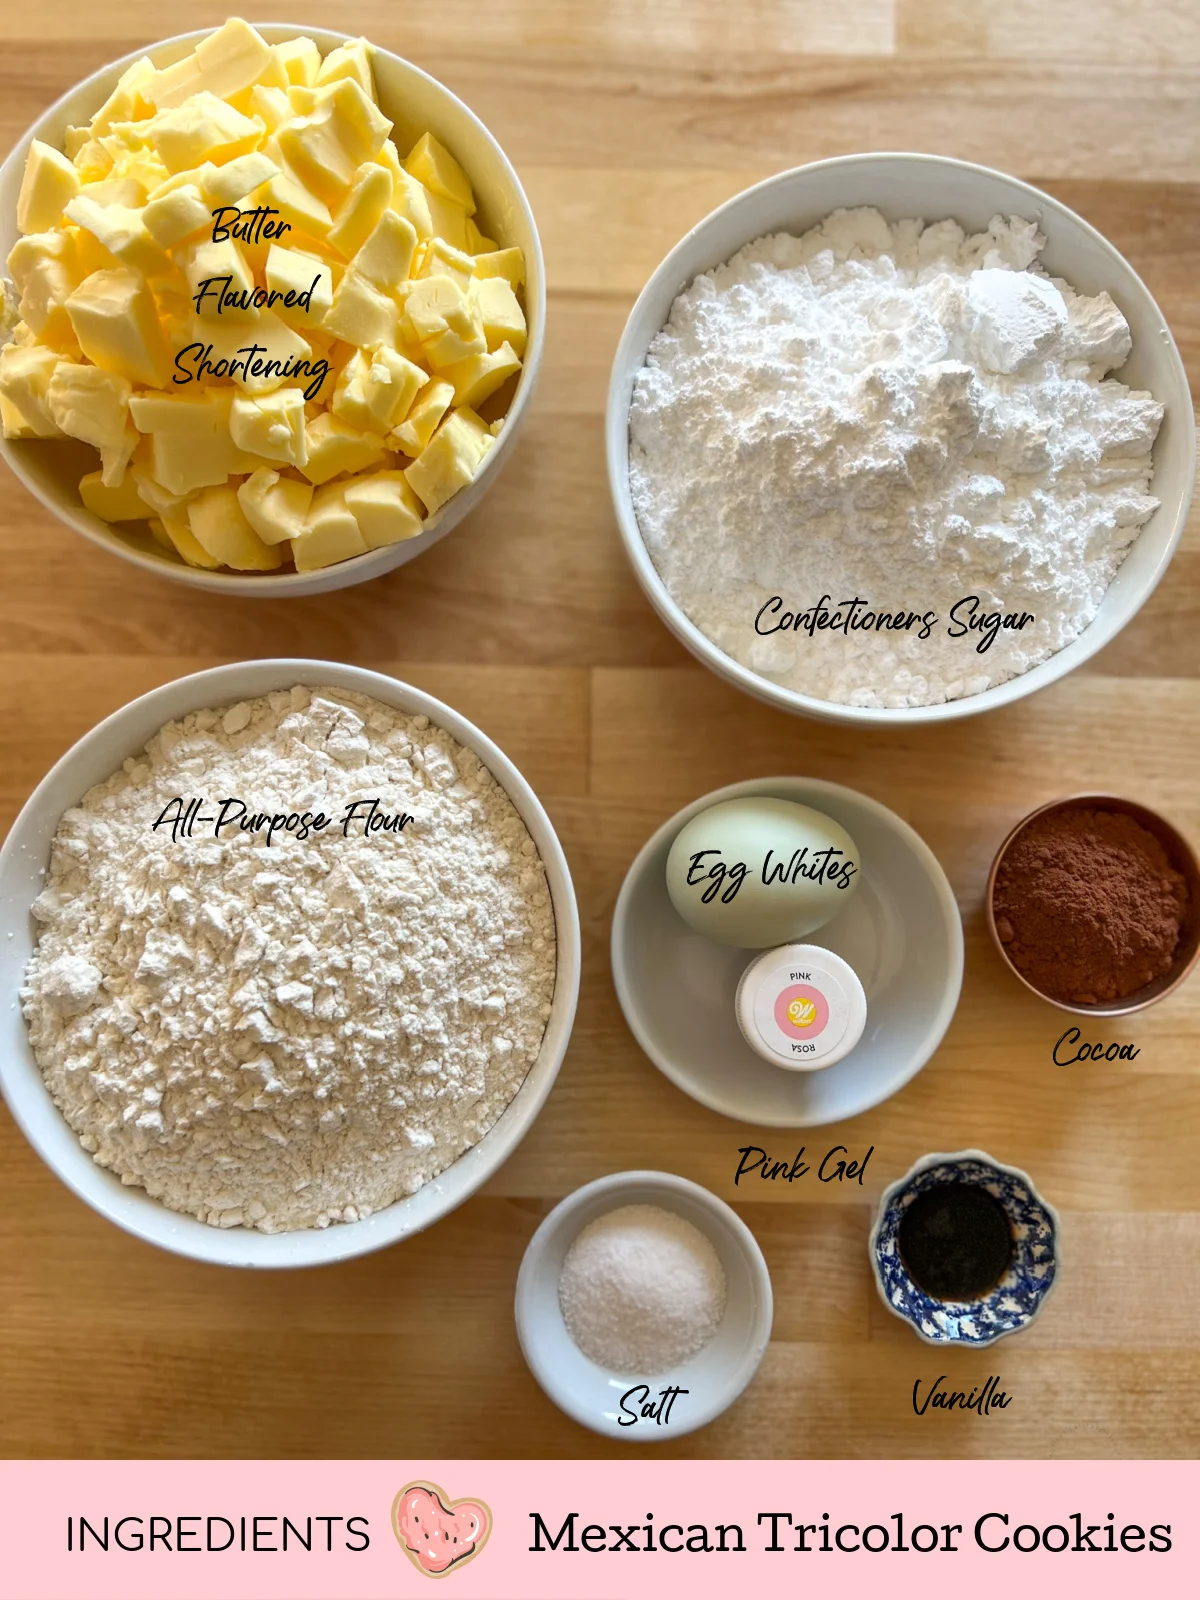 Ingredients include shortening, flour and confectioners sugar